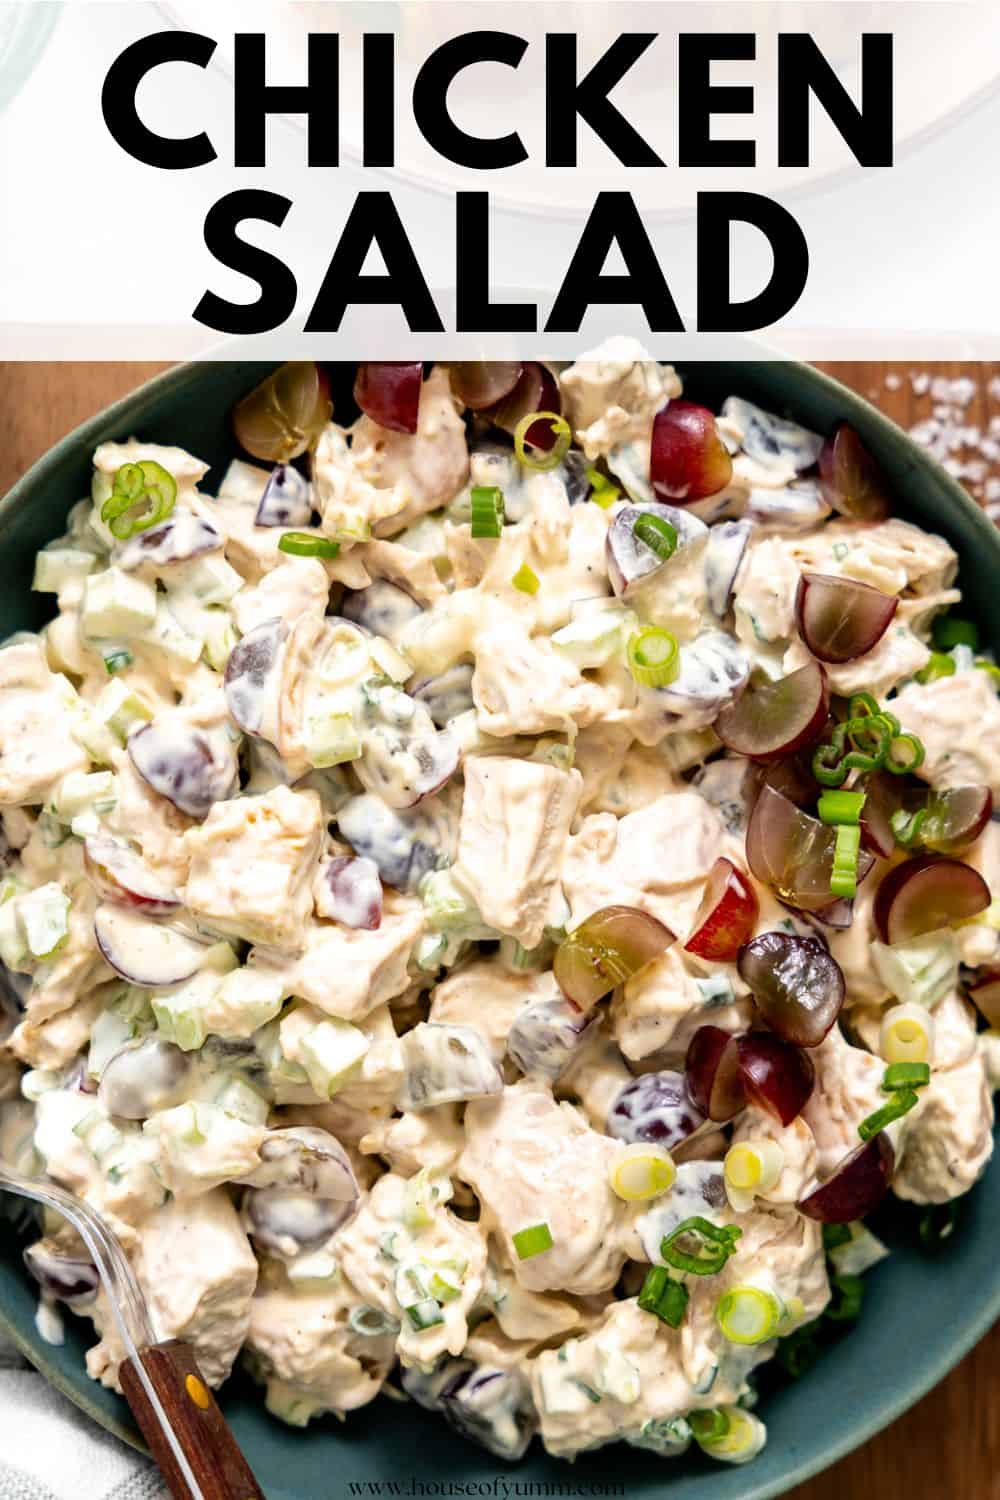 Chicken salad with text.